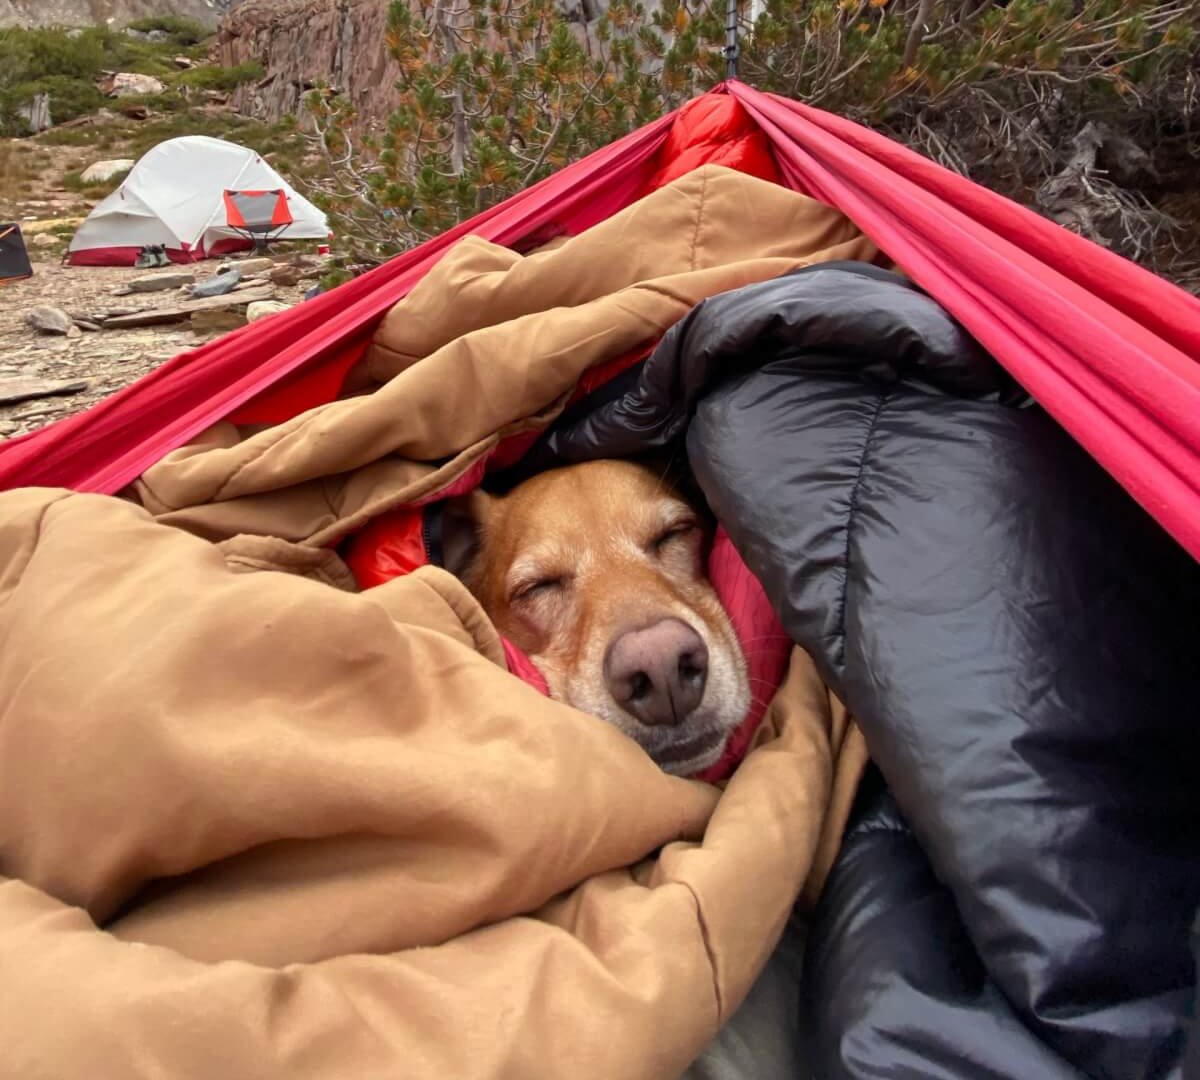 A dog’s sleeping face pokes out between the legs of a napping camper